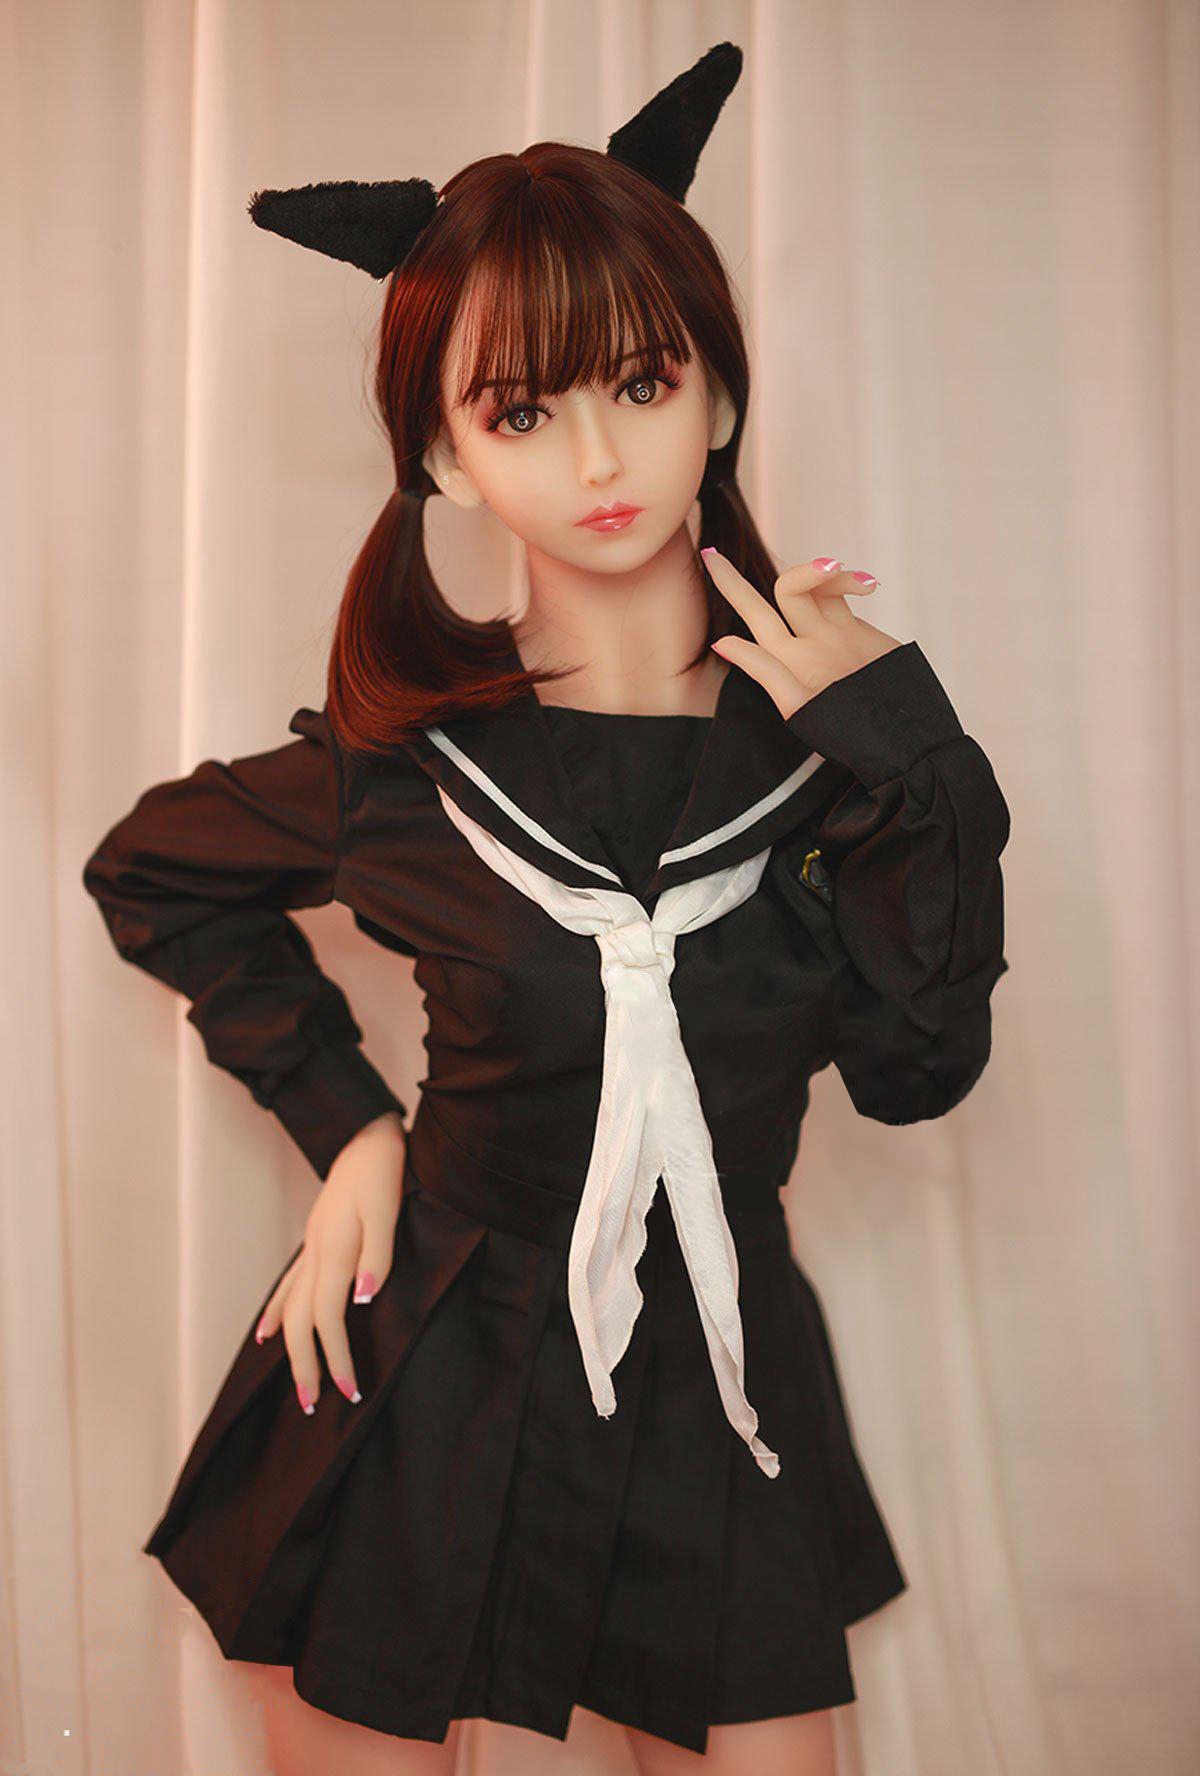 Lilly-Cute-Asian-Sex-Doll-12